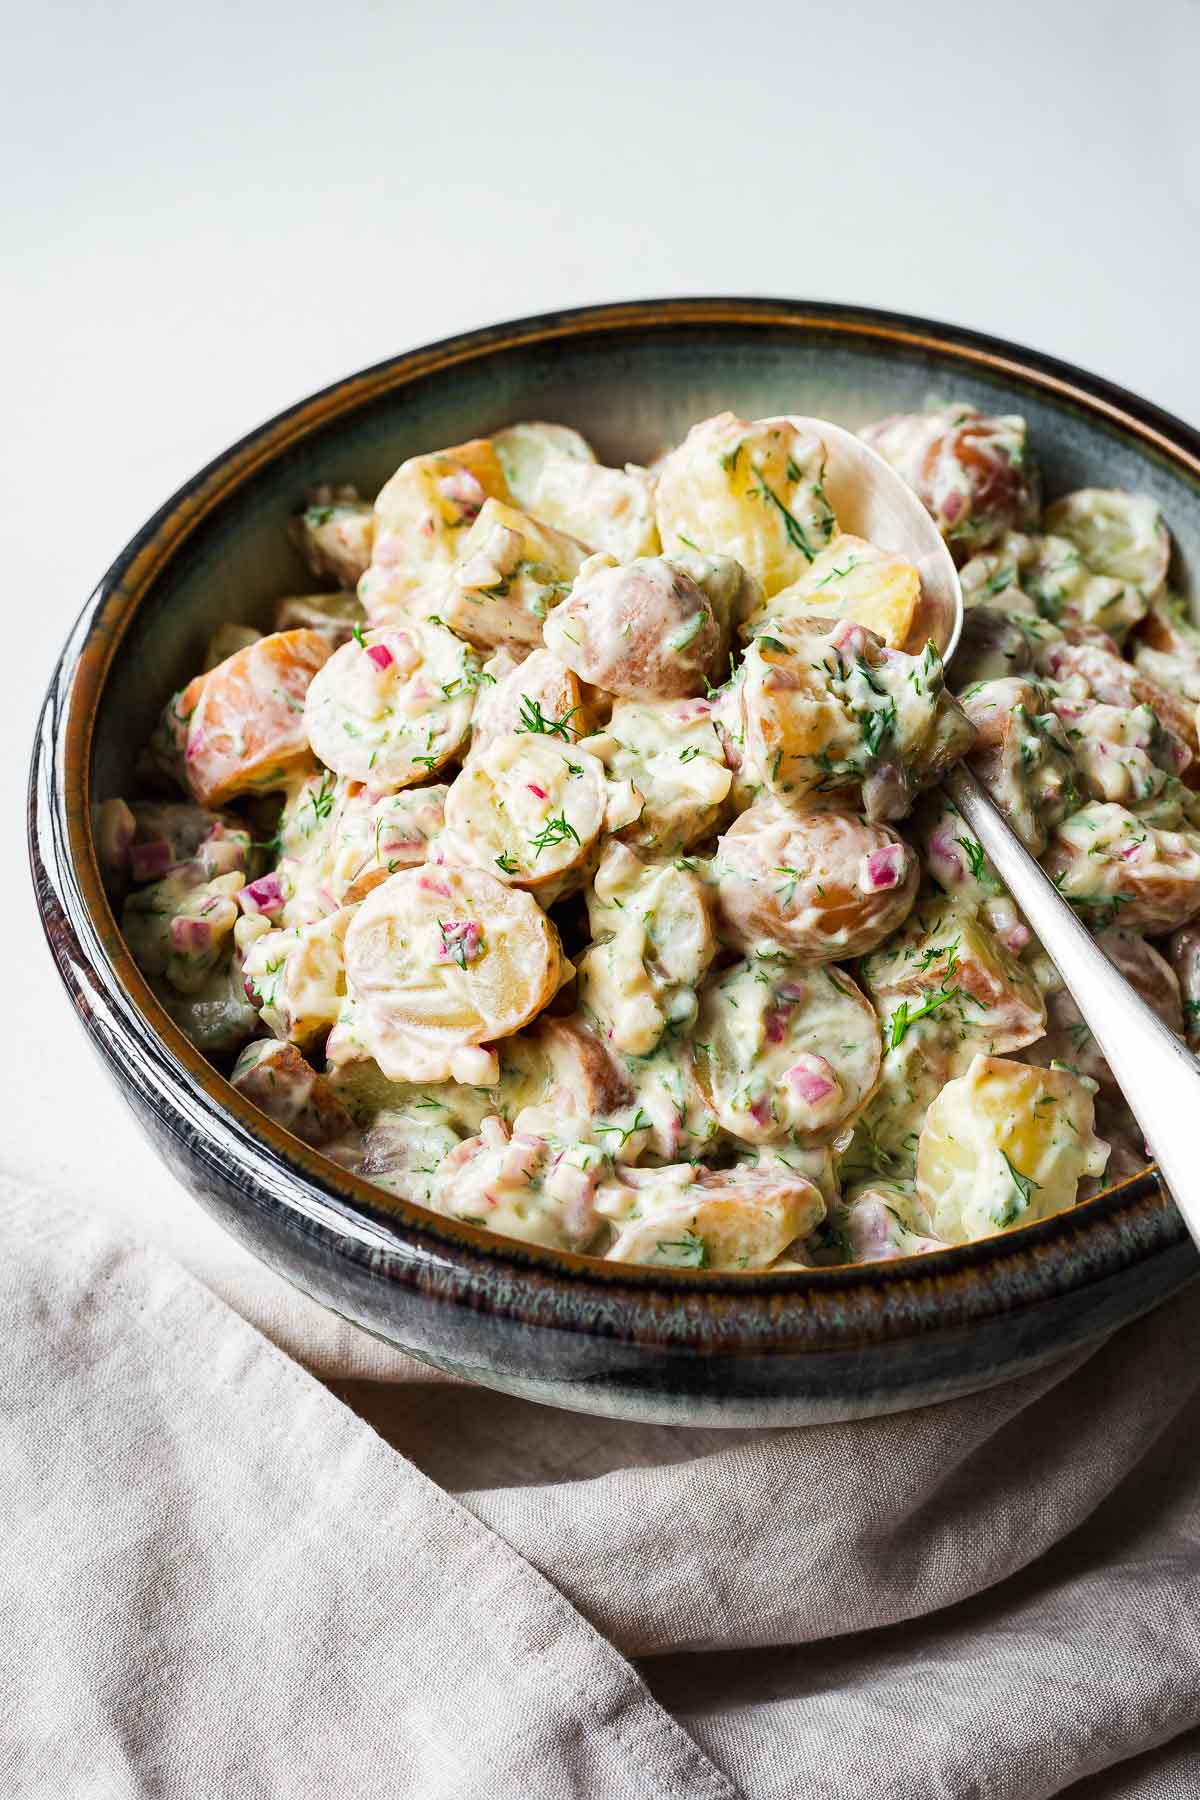 Red potato salad with dill and a creamy dressing in a serving bowl with silver spoon.